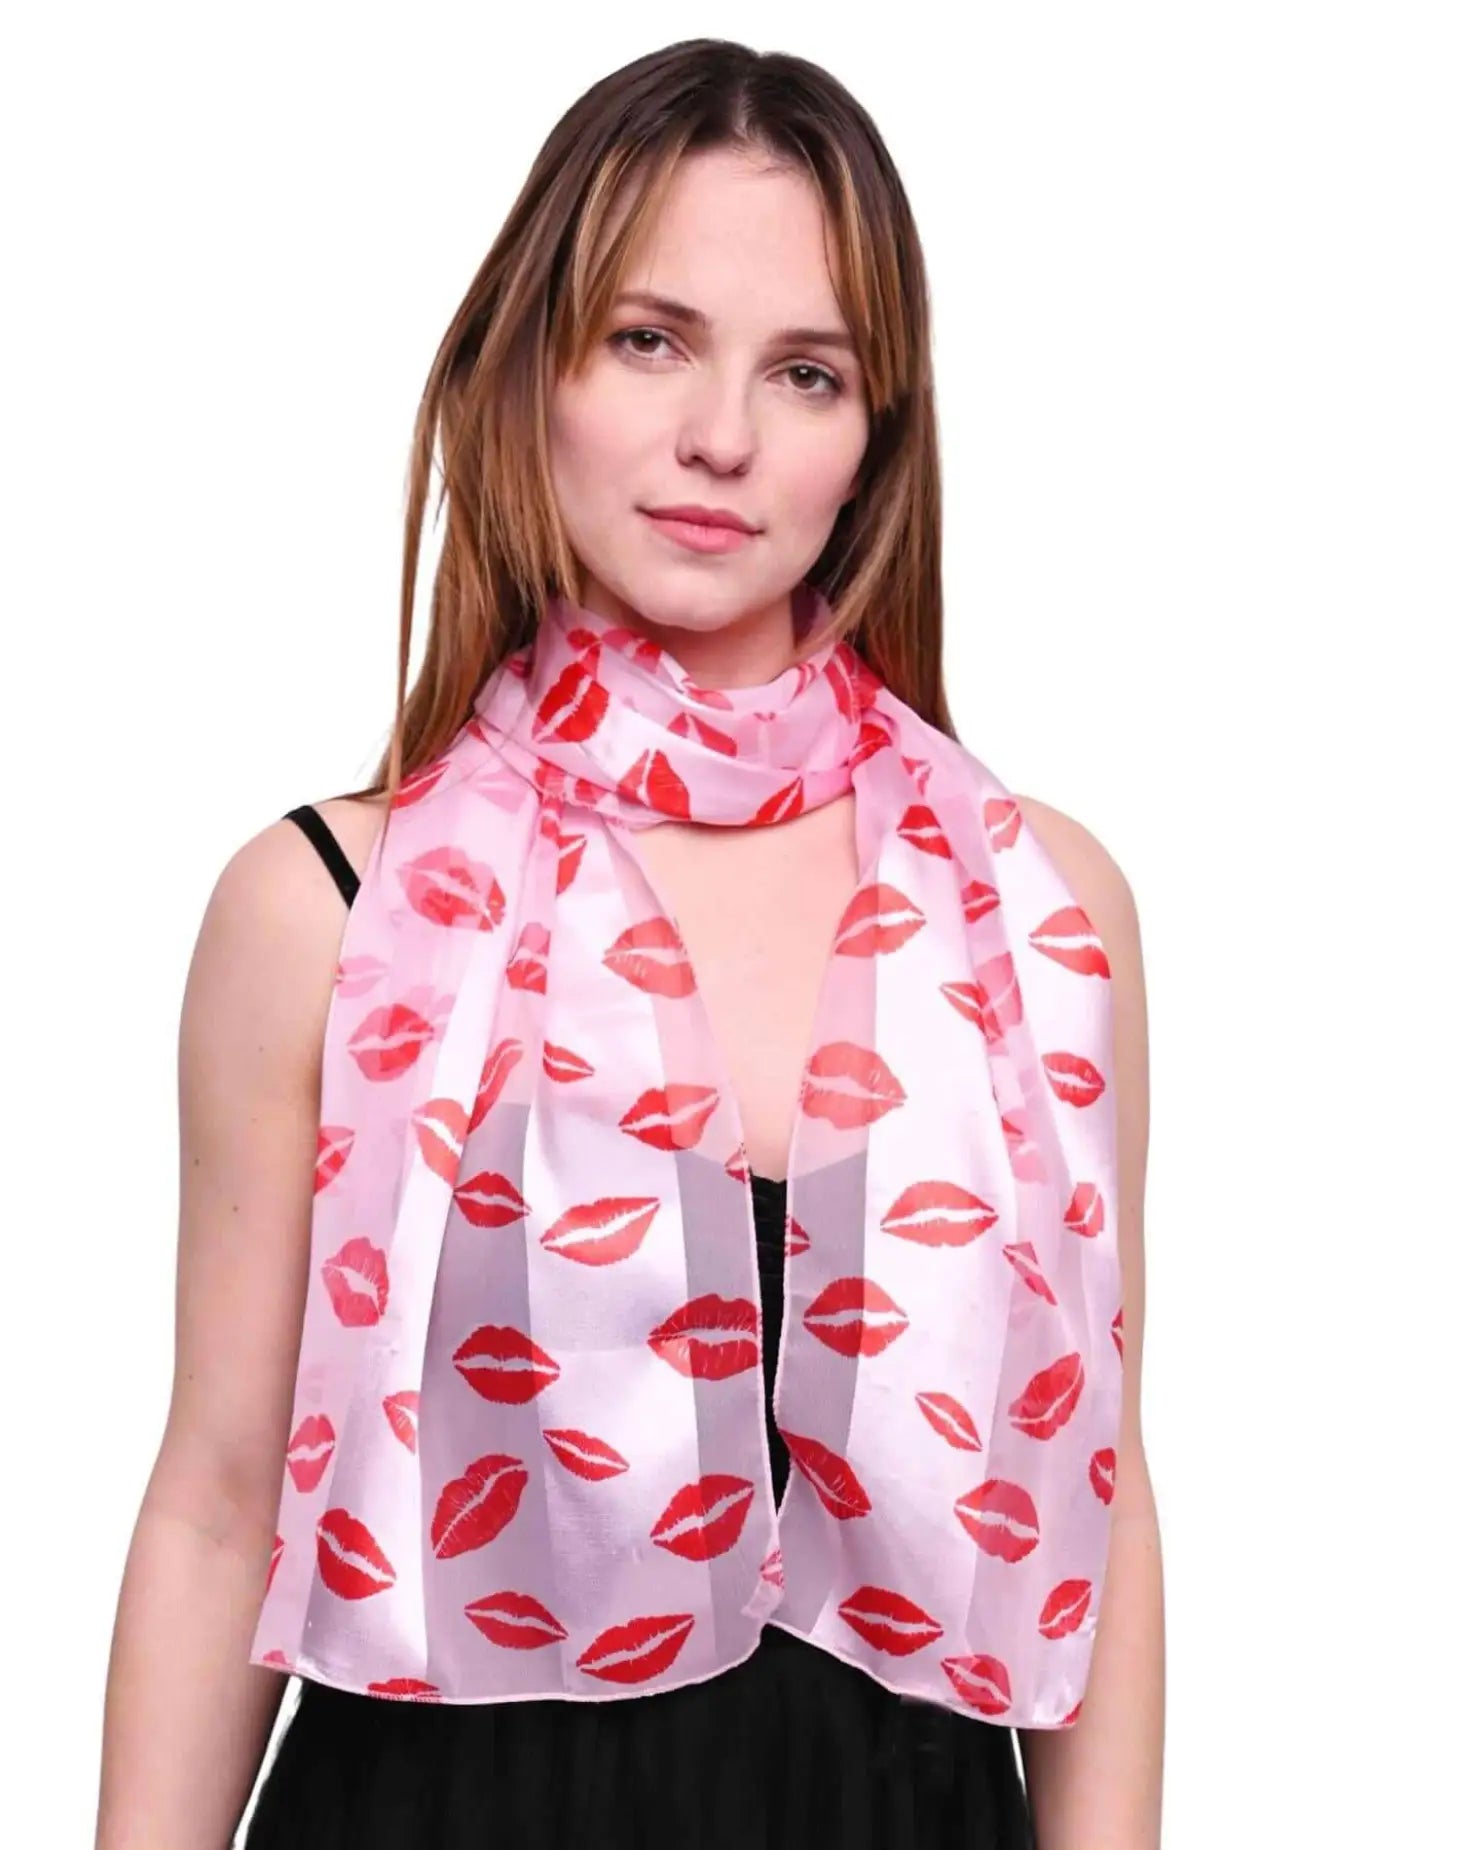 Satin lightweight scarf with kiss mark design worn by woman